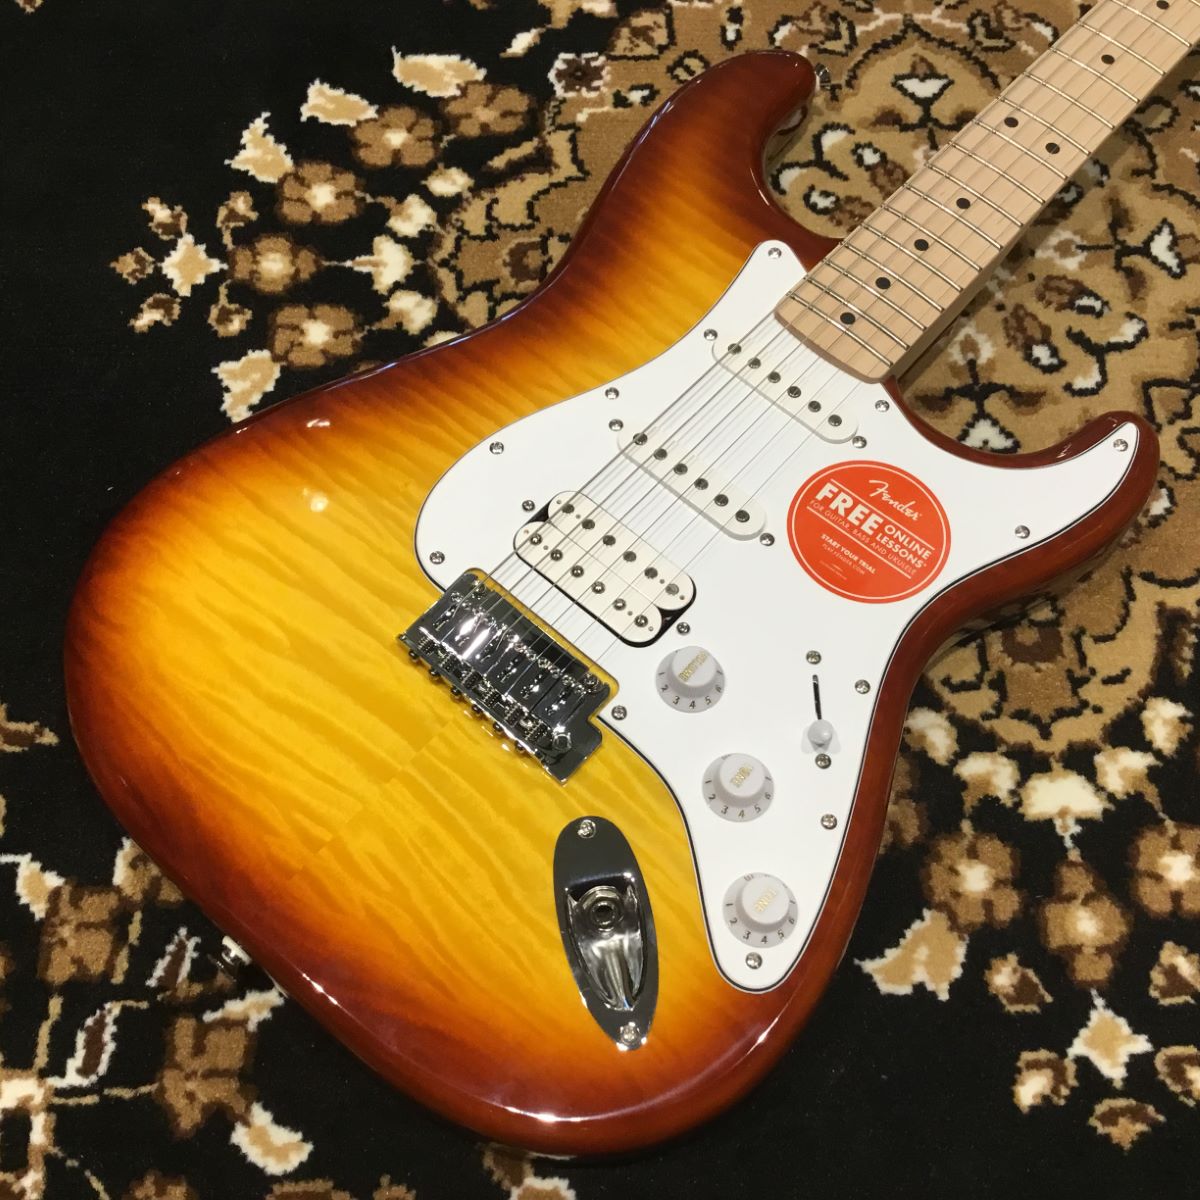 Squier by Fender Affinity Series Stratocaster FMT HSS Maple Fingerboard  White Pickguard Sienna Sunburst エレキギター ストラトキャスター スクワイヤー / スクワイア 【